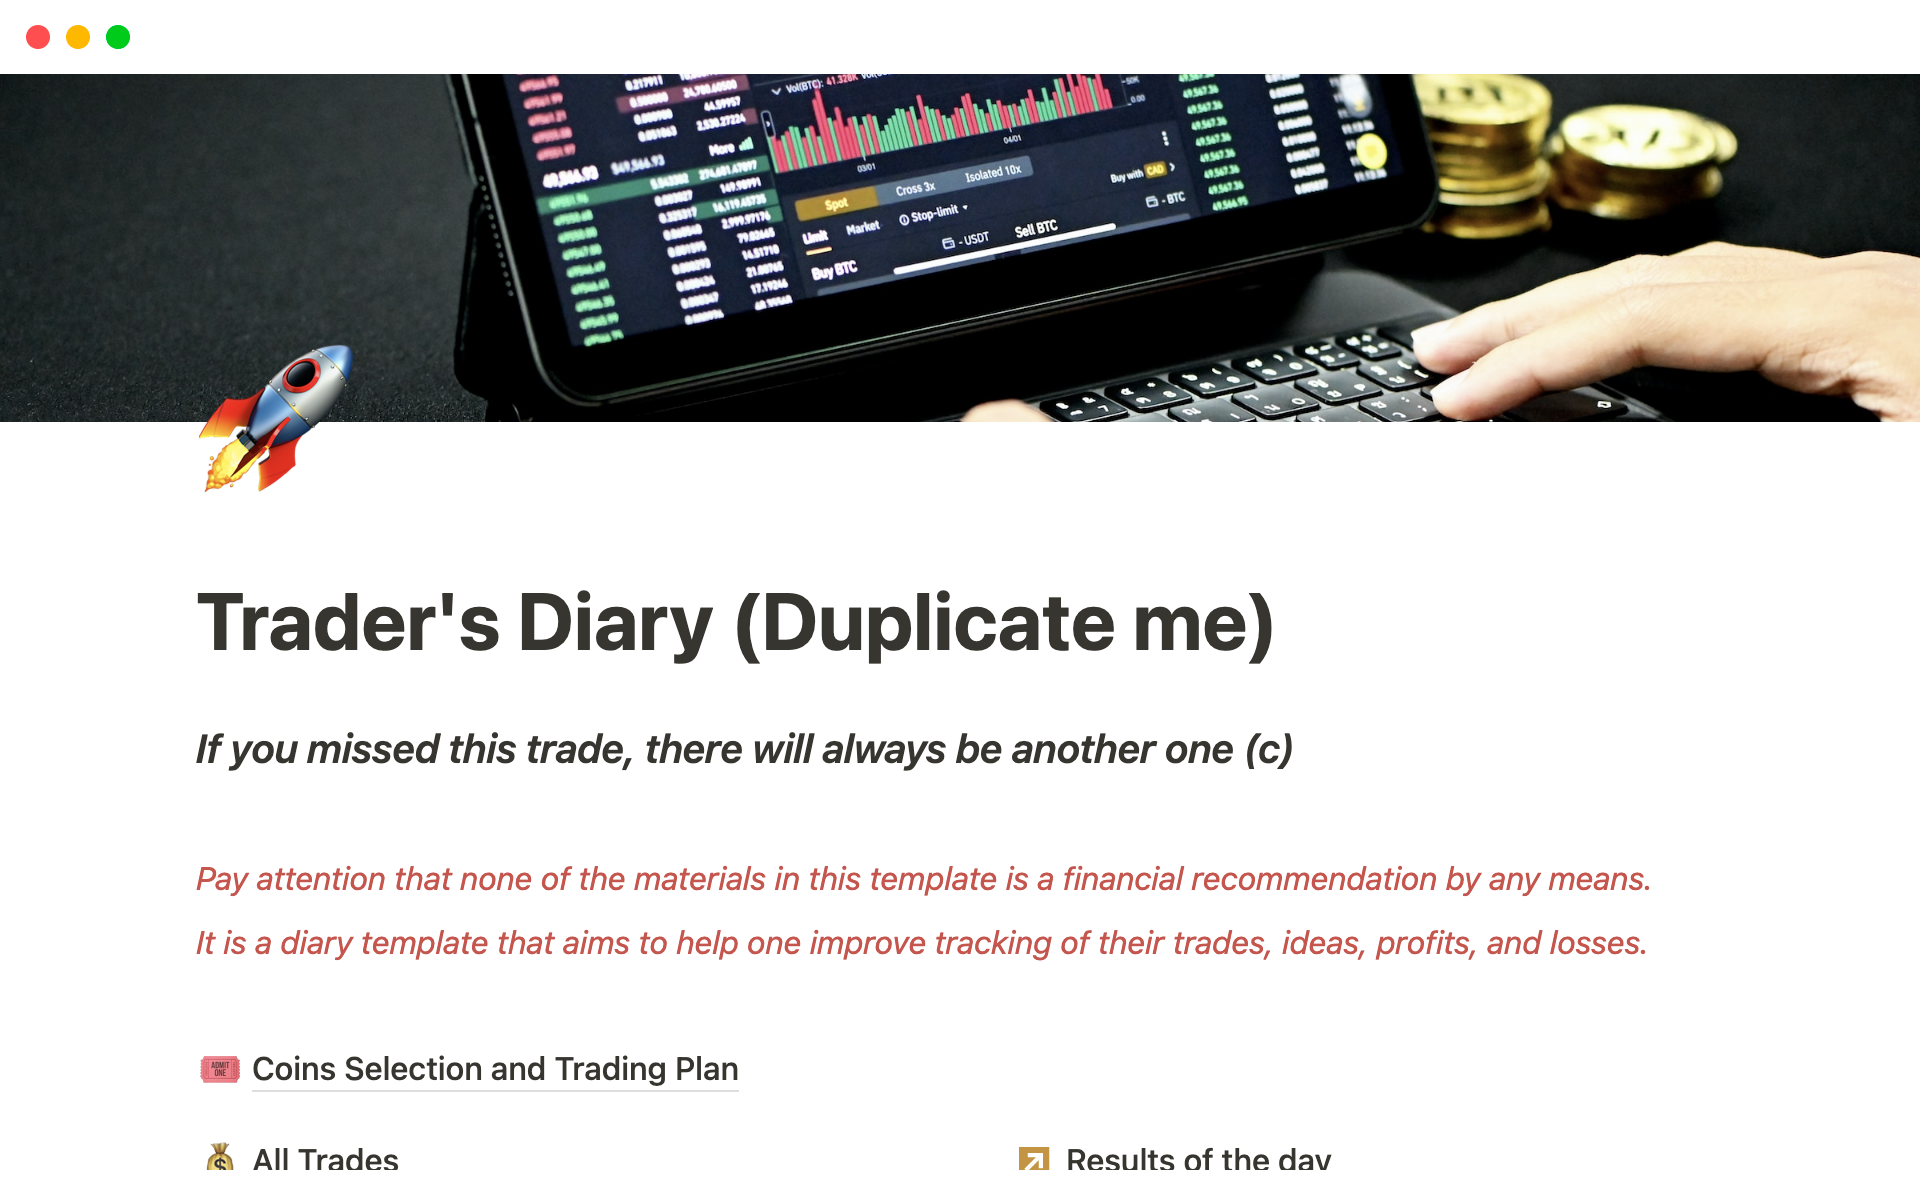 This Template is an extremely useful and organized journaling tool, essential for every trader